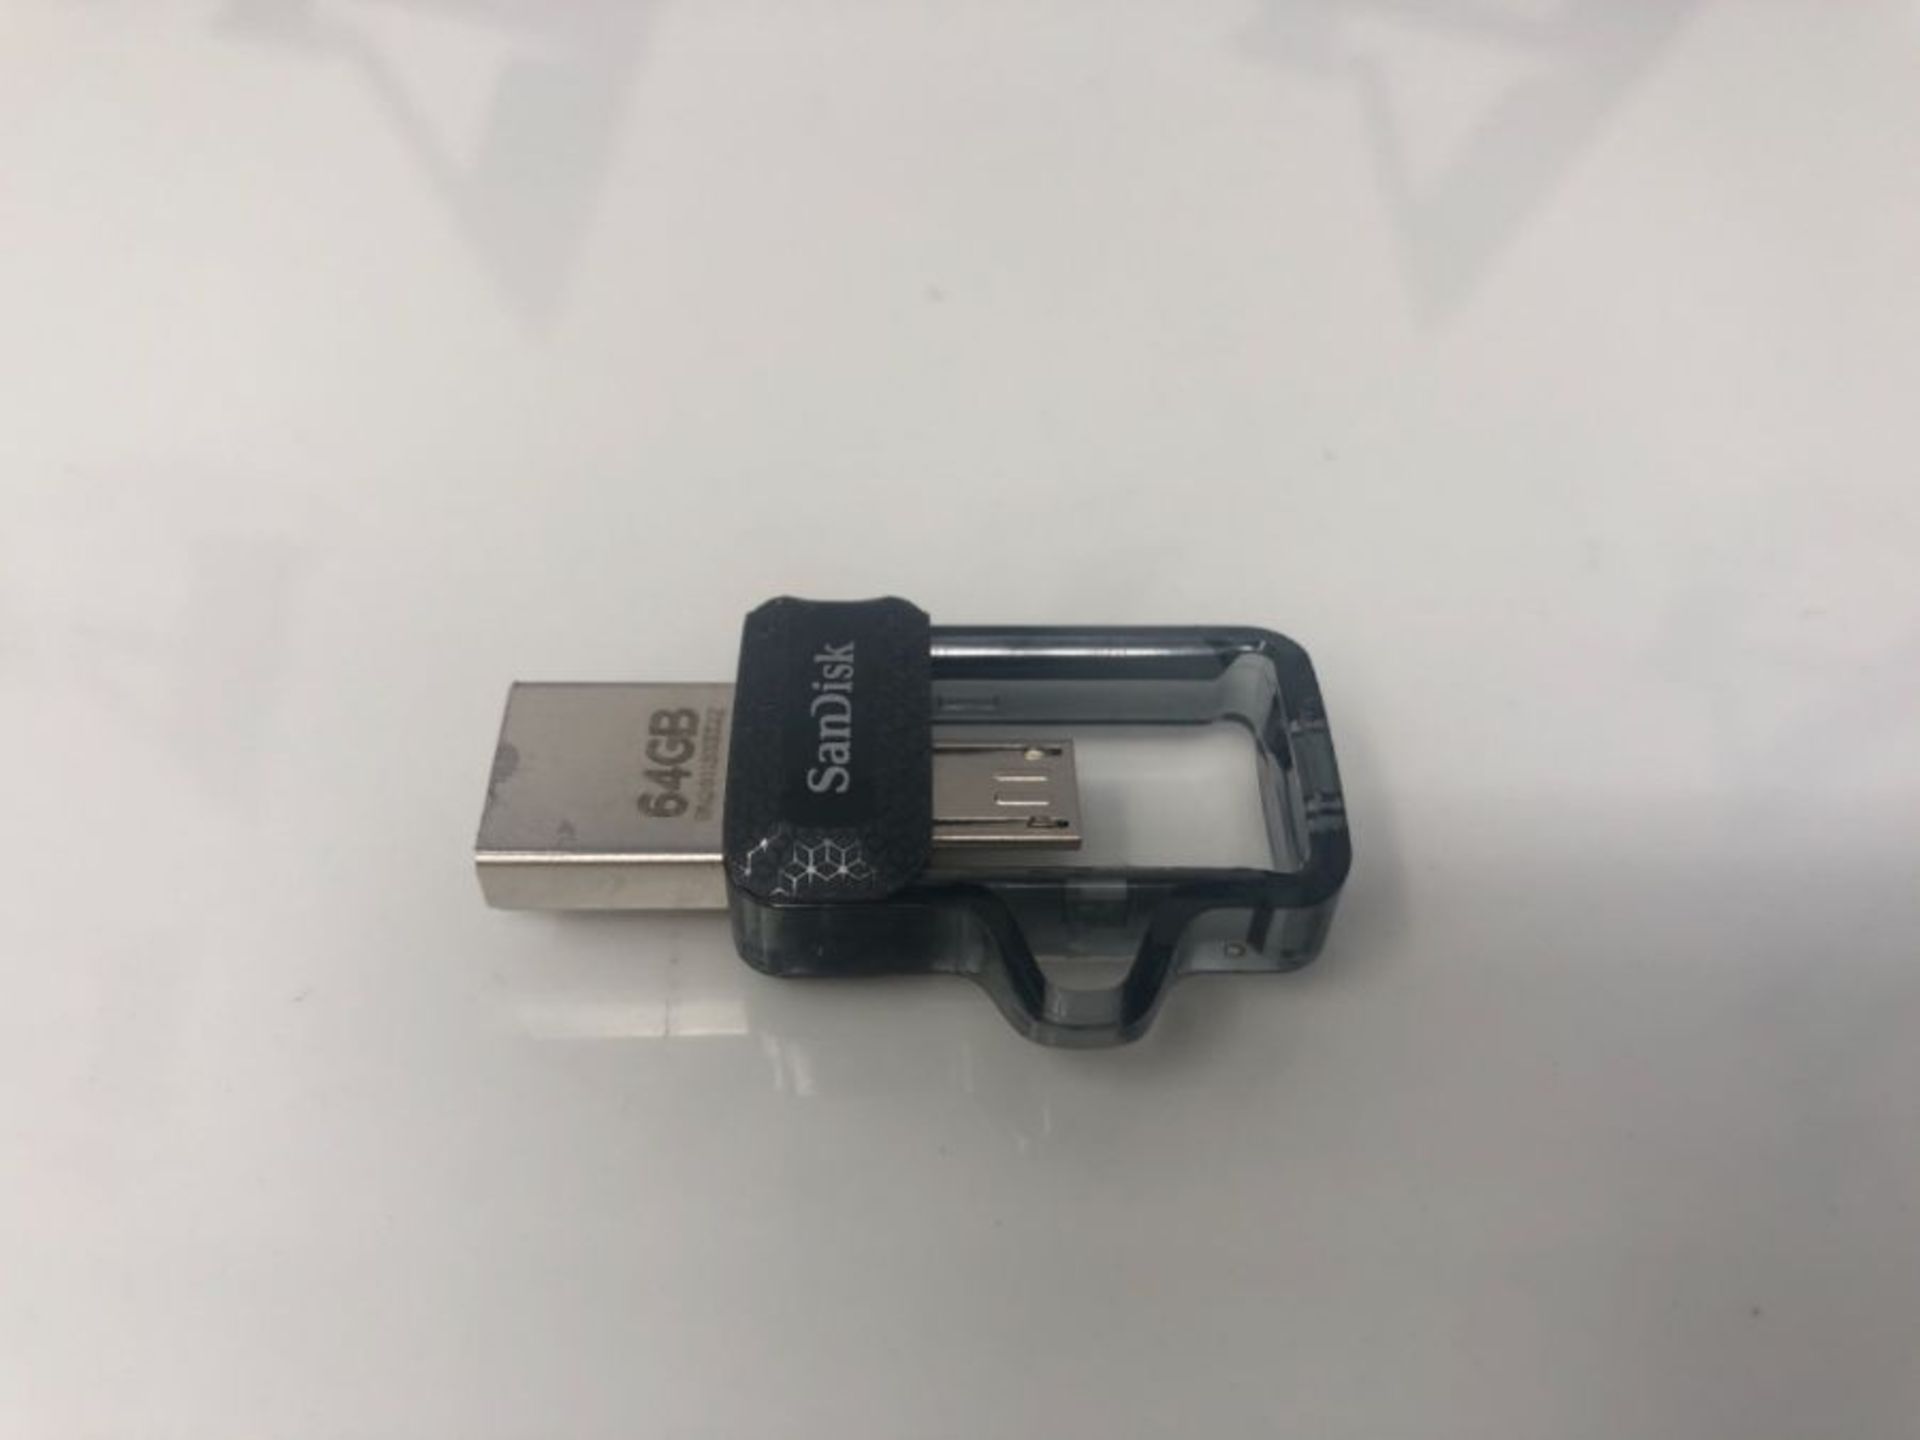 SanDisk Ultra 64GB Dual USB Flash Drive USB M3.0 up to 150 MB/s - Image 3 of 3